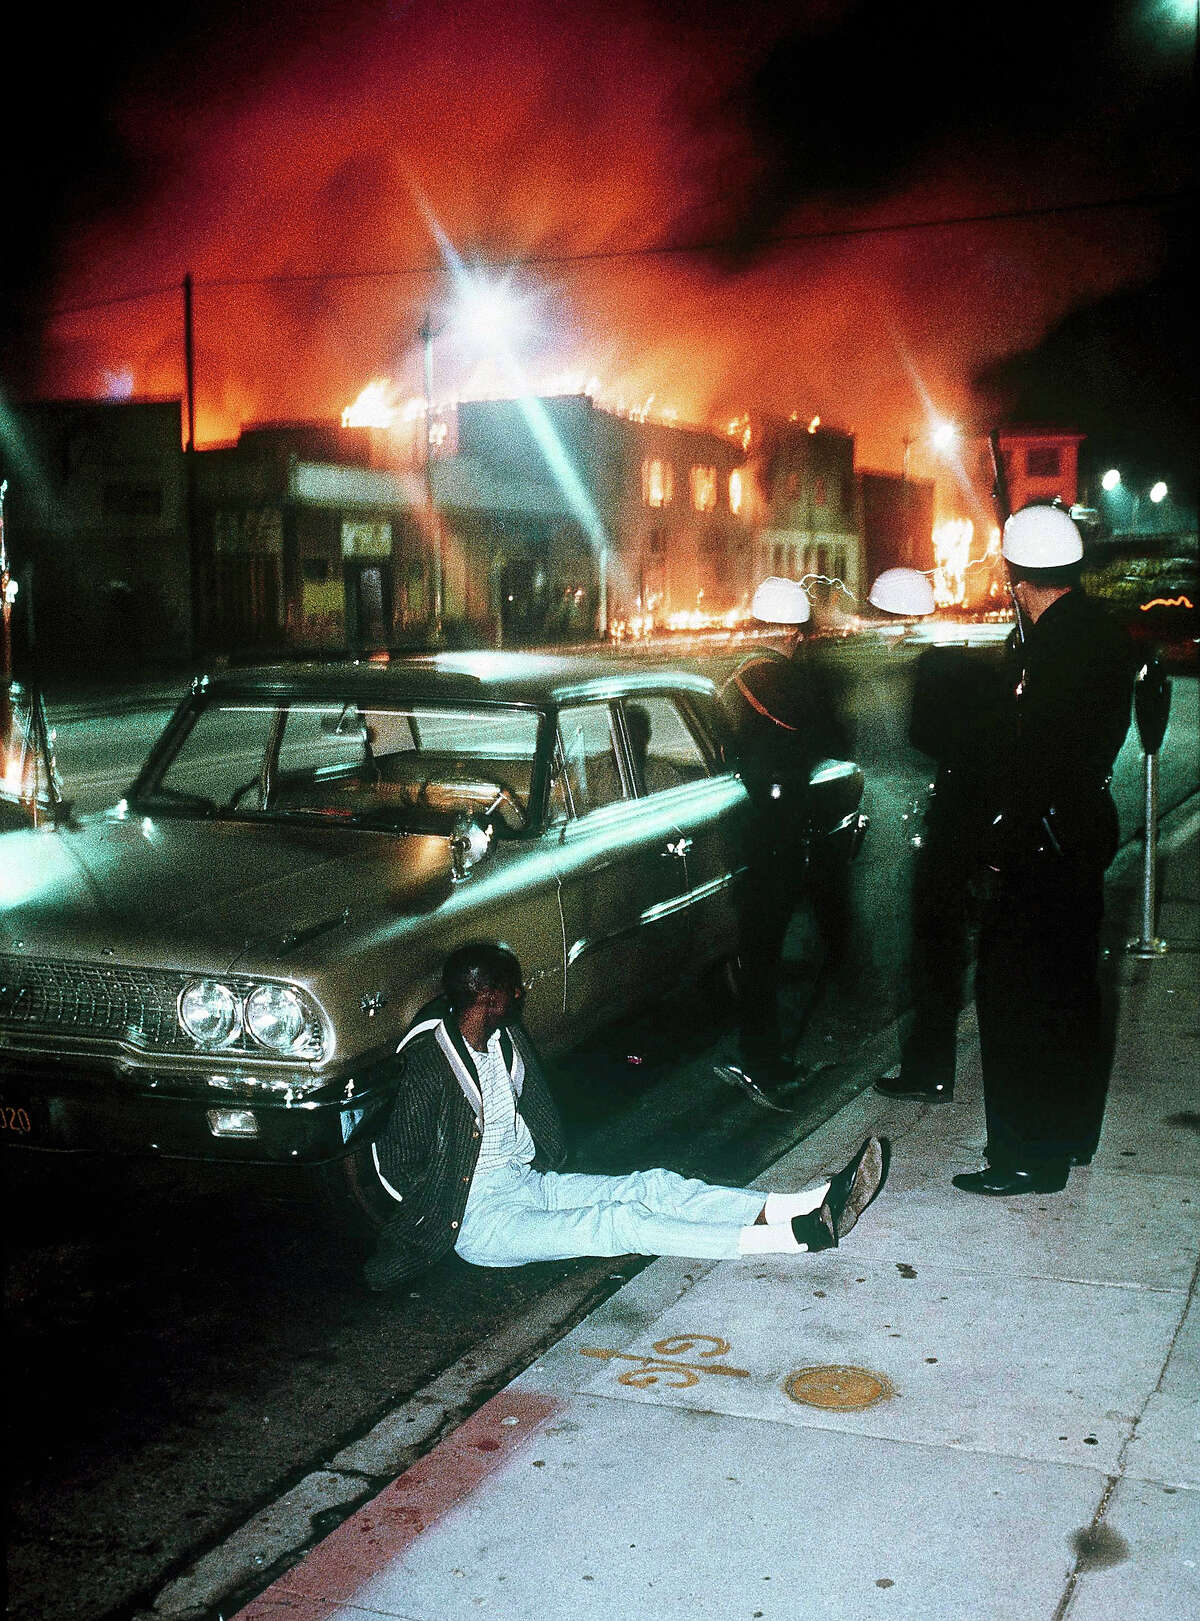 50 years ago: The Watts riots